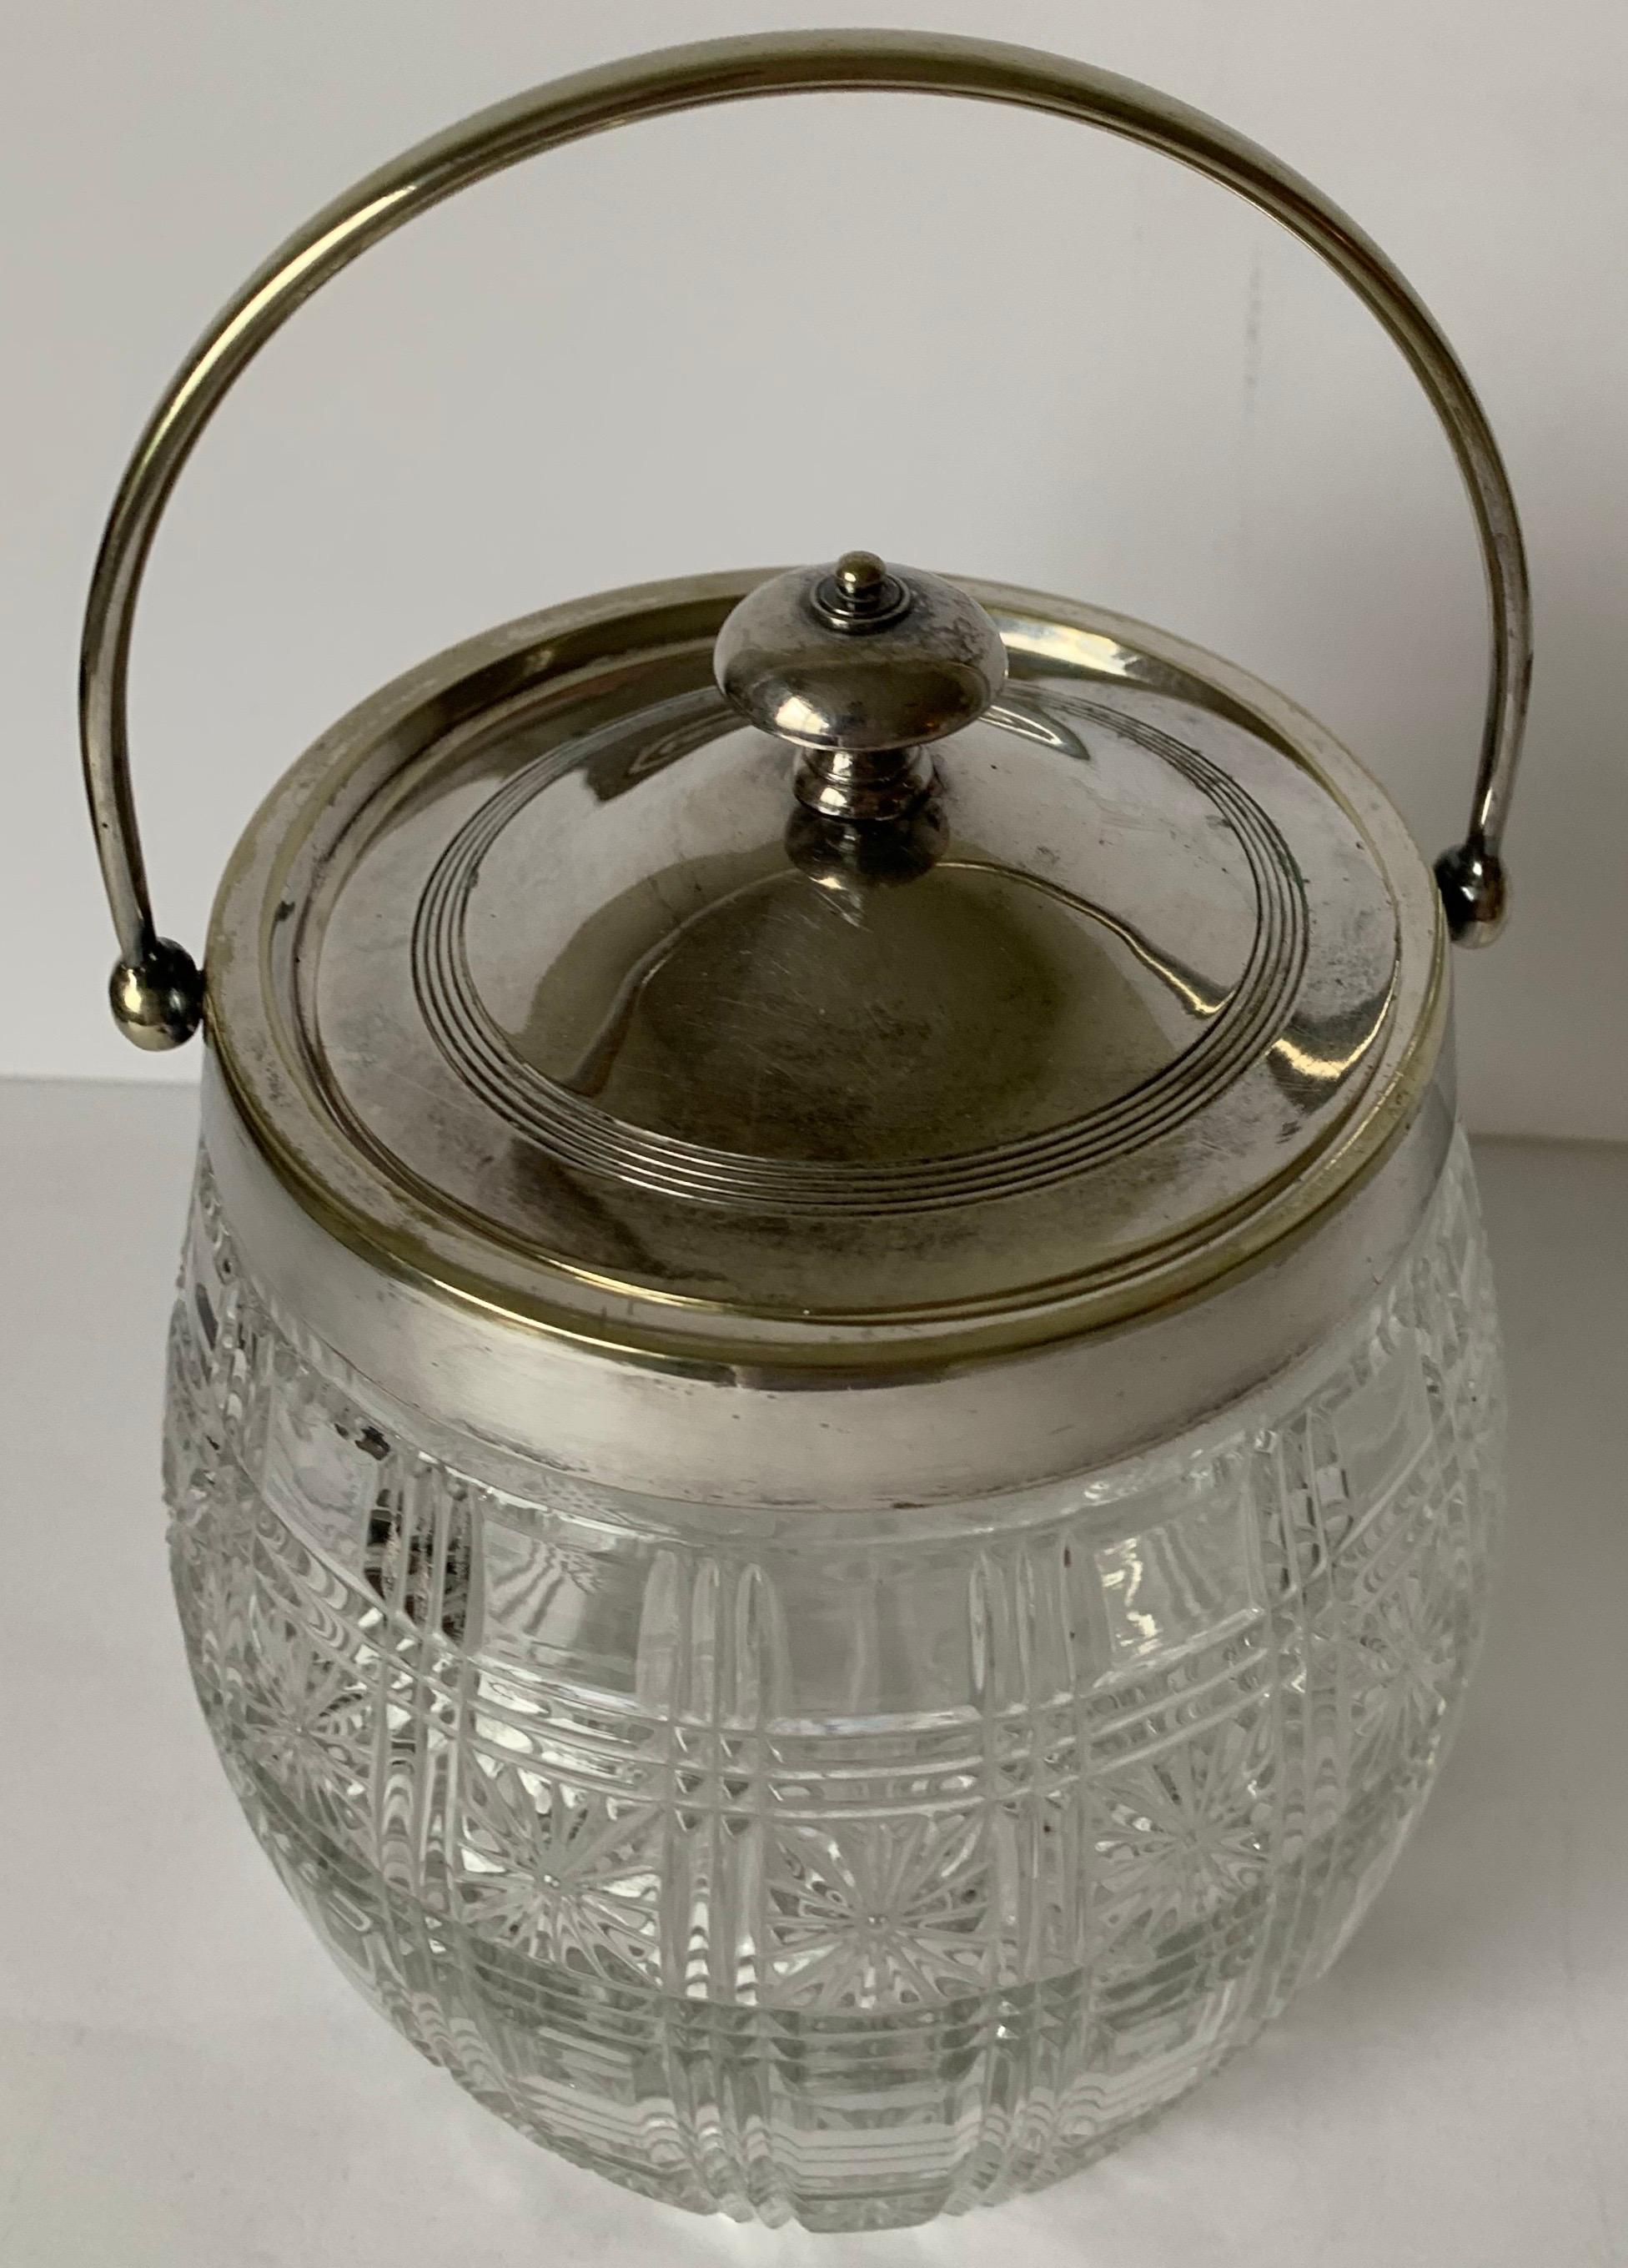 English cut glass and silver plate biscuit barrel. Clear cut glass. Silver plate lid and handle. No makers mark or signature.